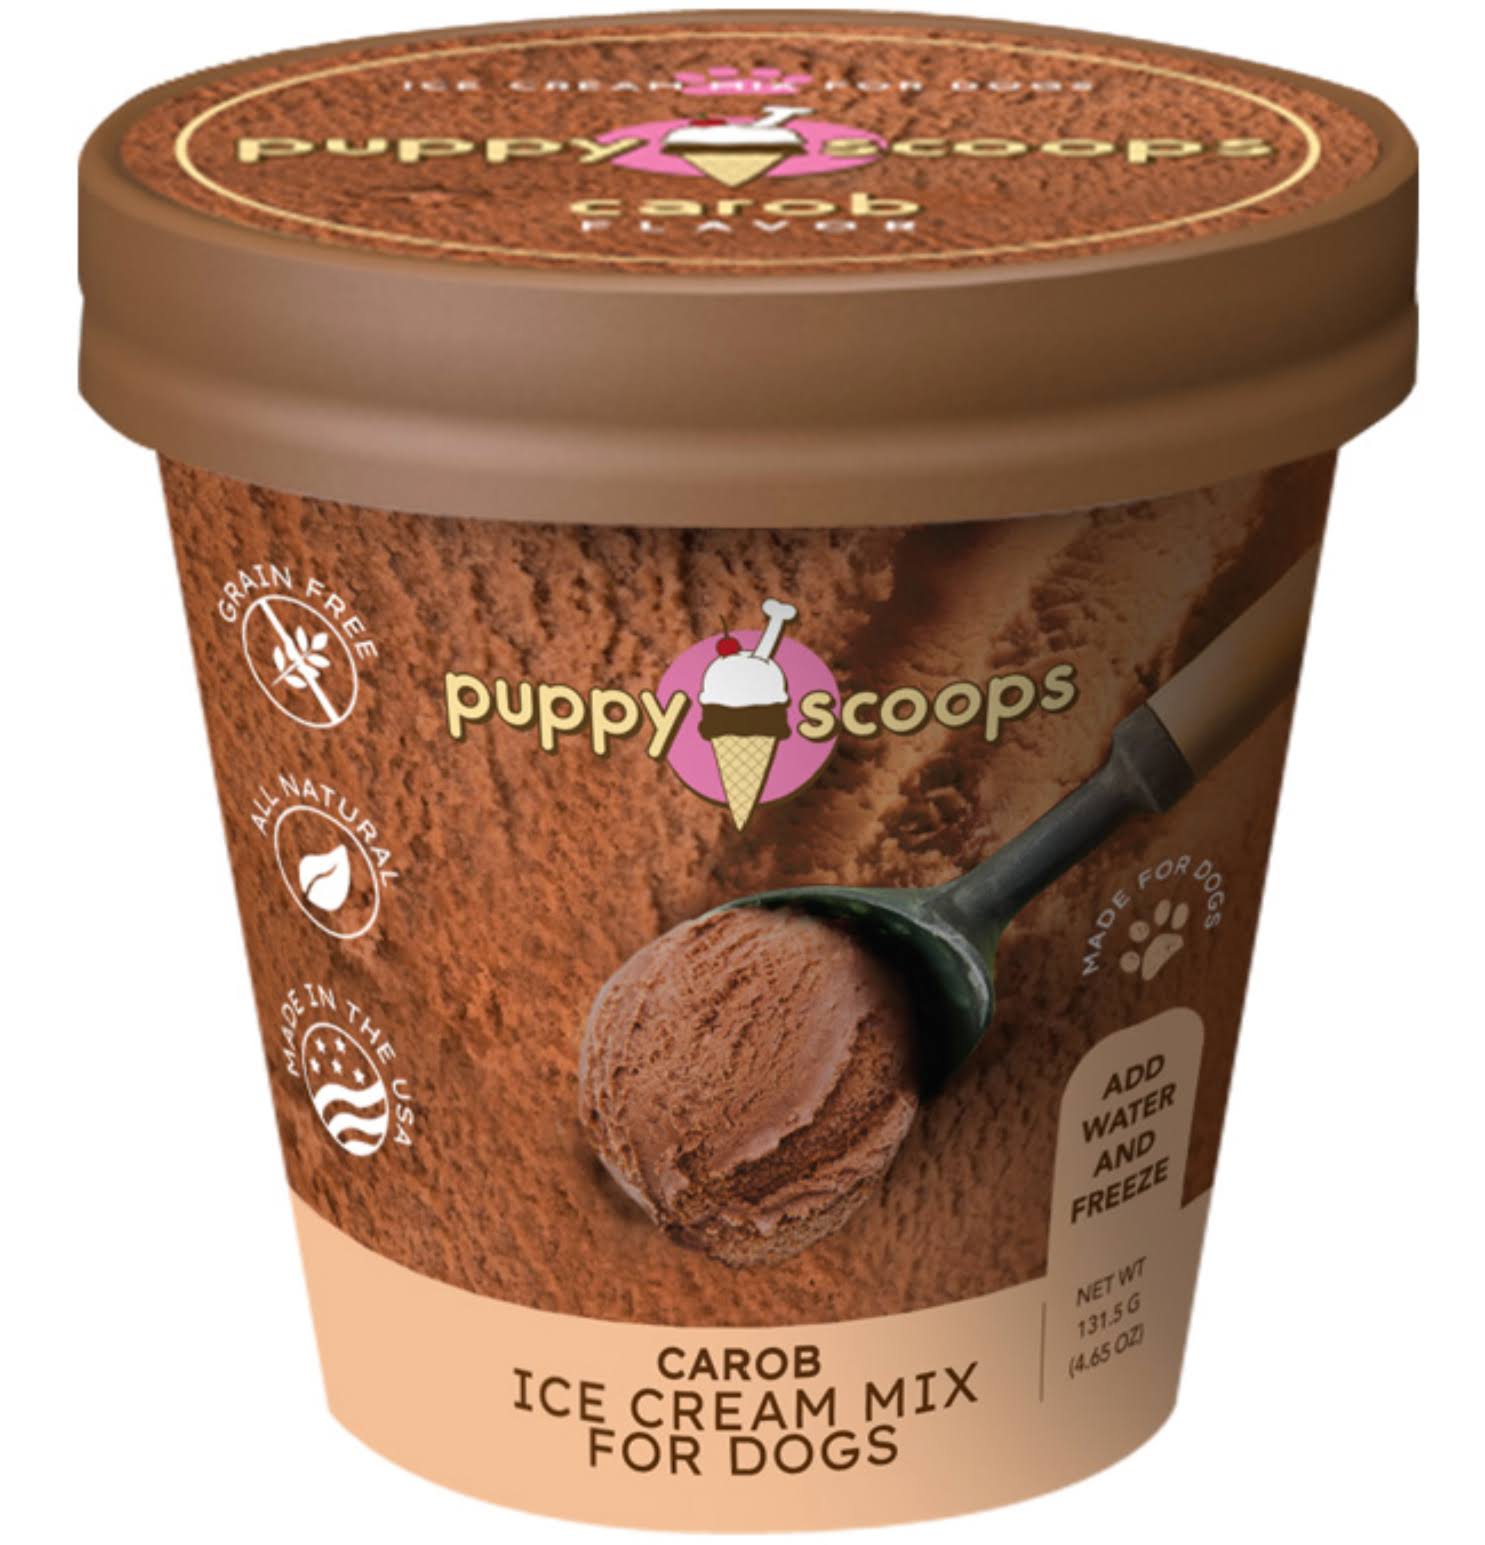 Puppy Scoops Ice Cream Mix for Dogs 2.32 oz / Carob